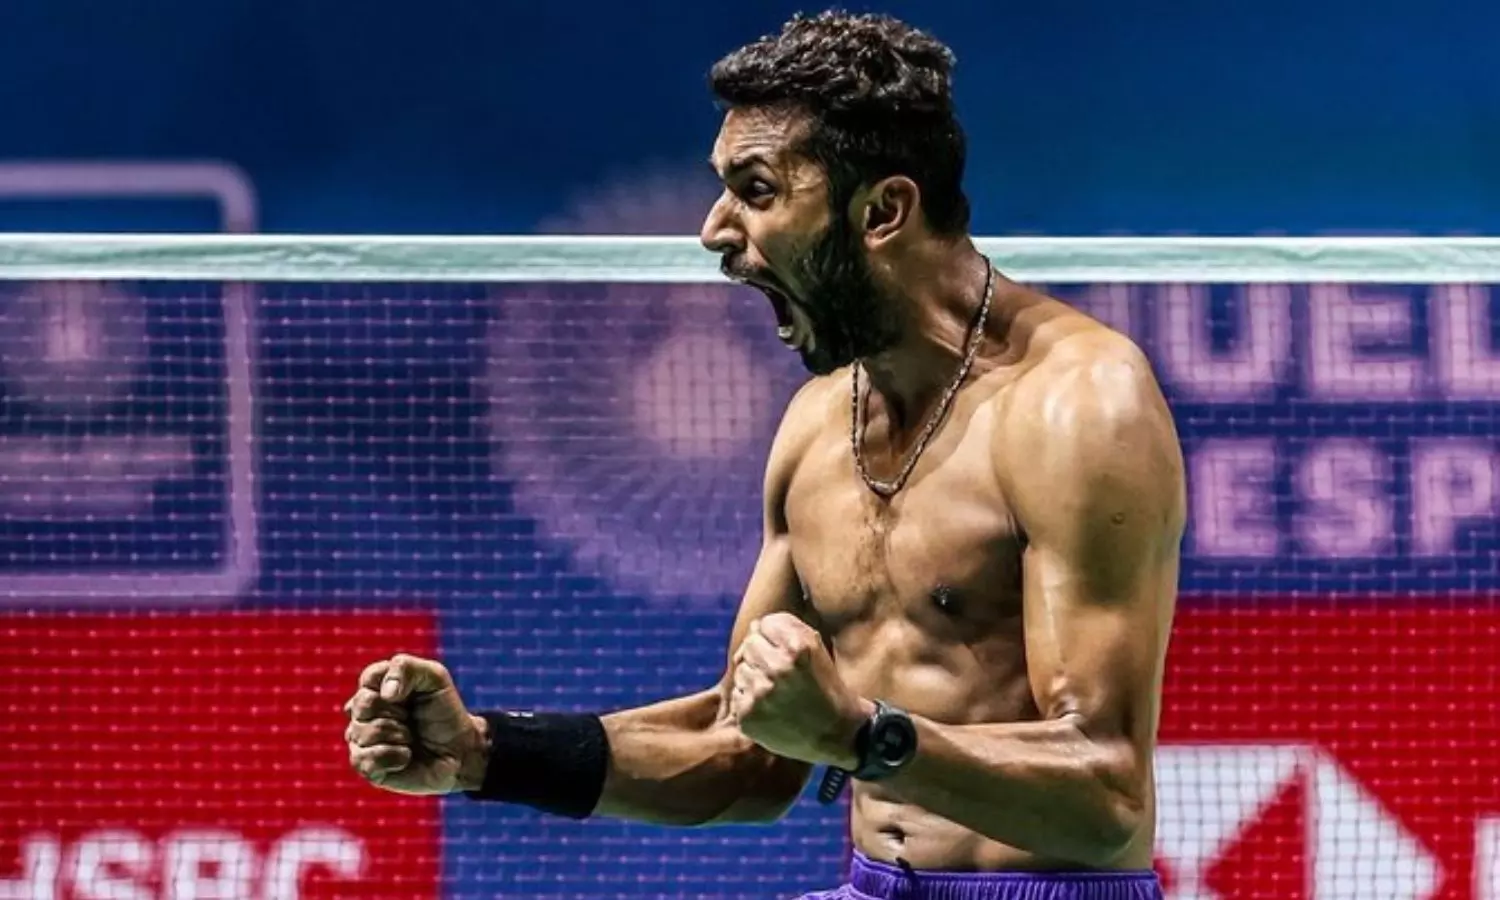 WATCH HS Prannoy rips off his jersey after reaching quarterfinal of BWF World Championships